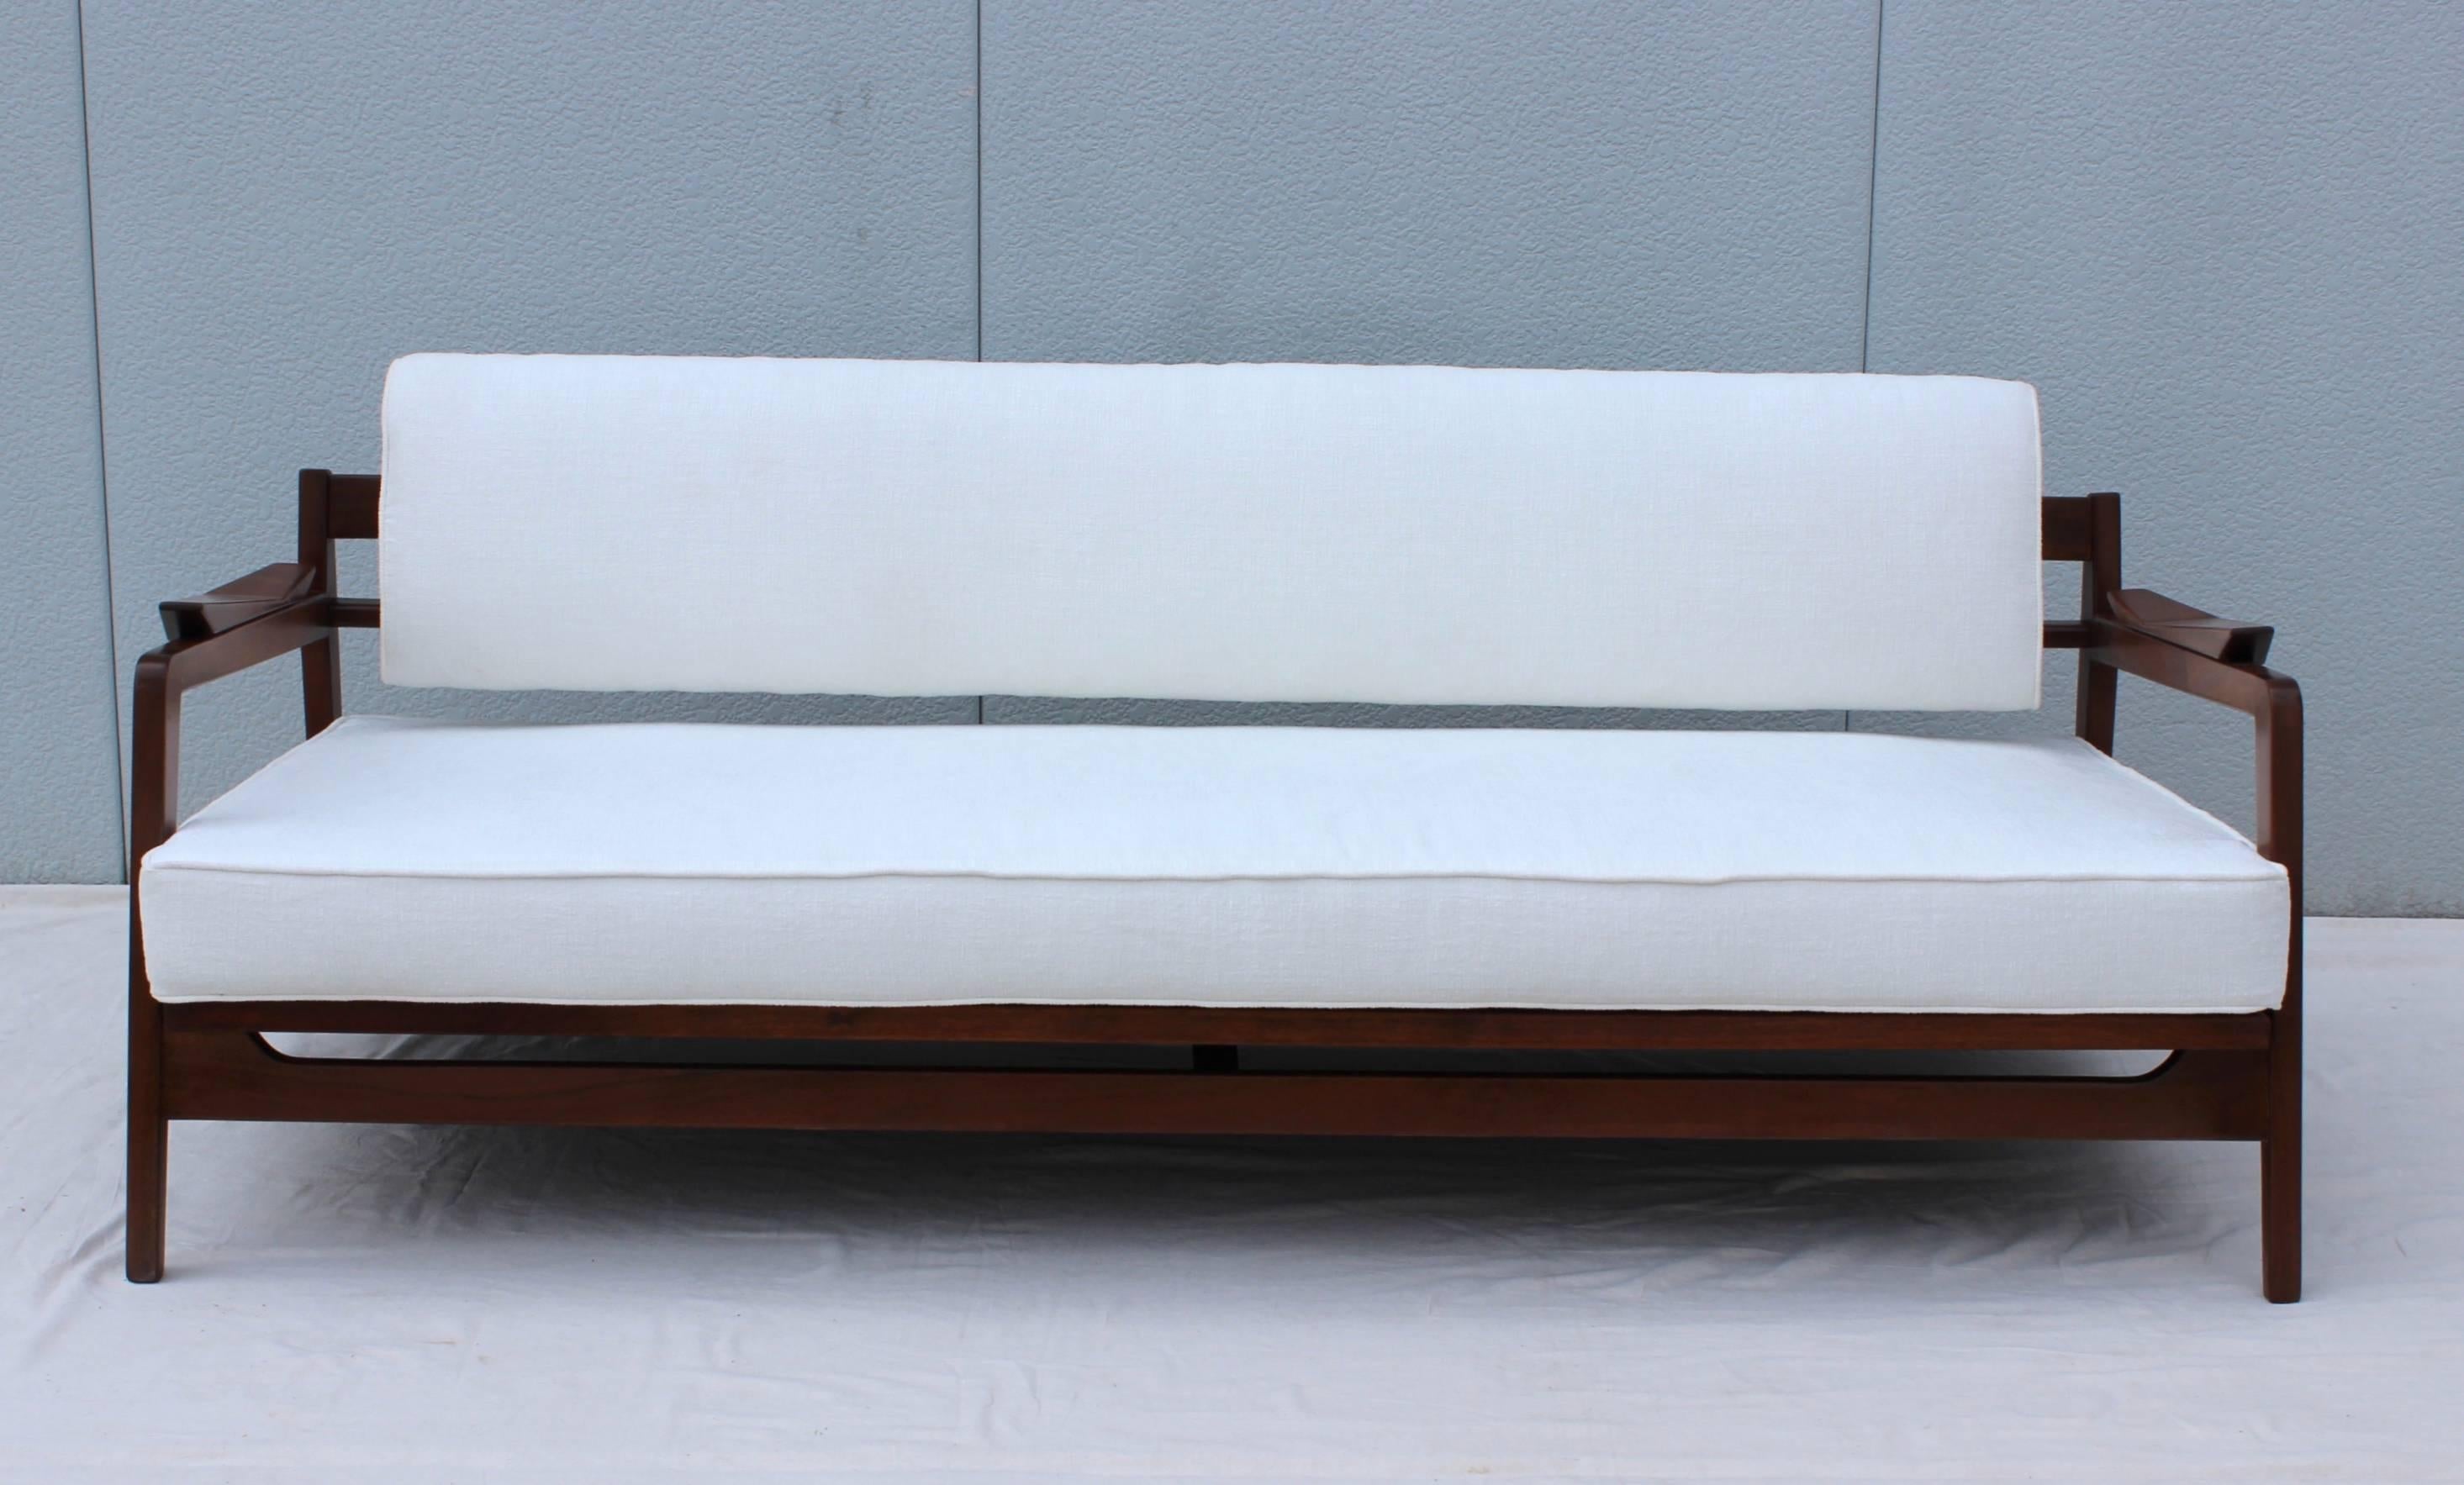 Stunning 1960s Jens Risom solid walnut daybed newly upholstered in Kravet white fabric, with pull-out mechanism to adjust to an even position.